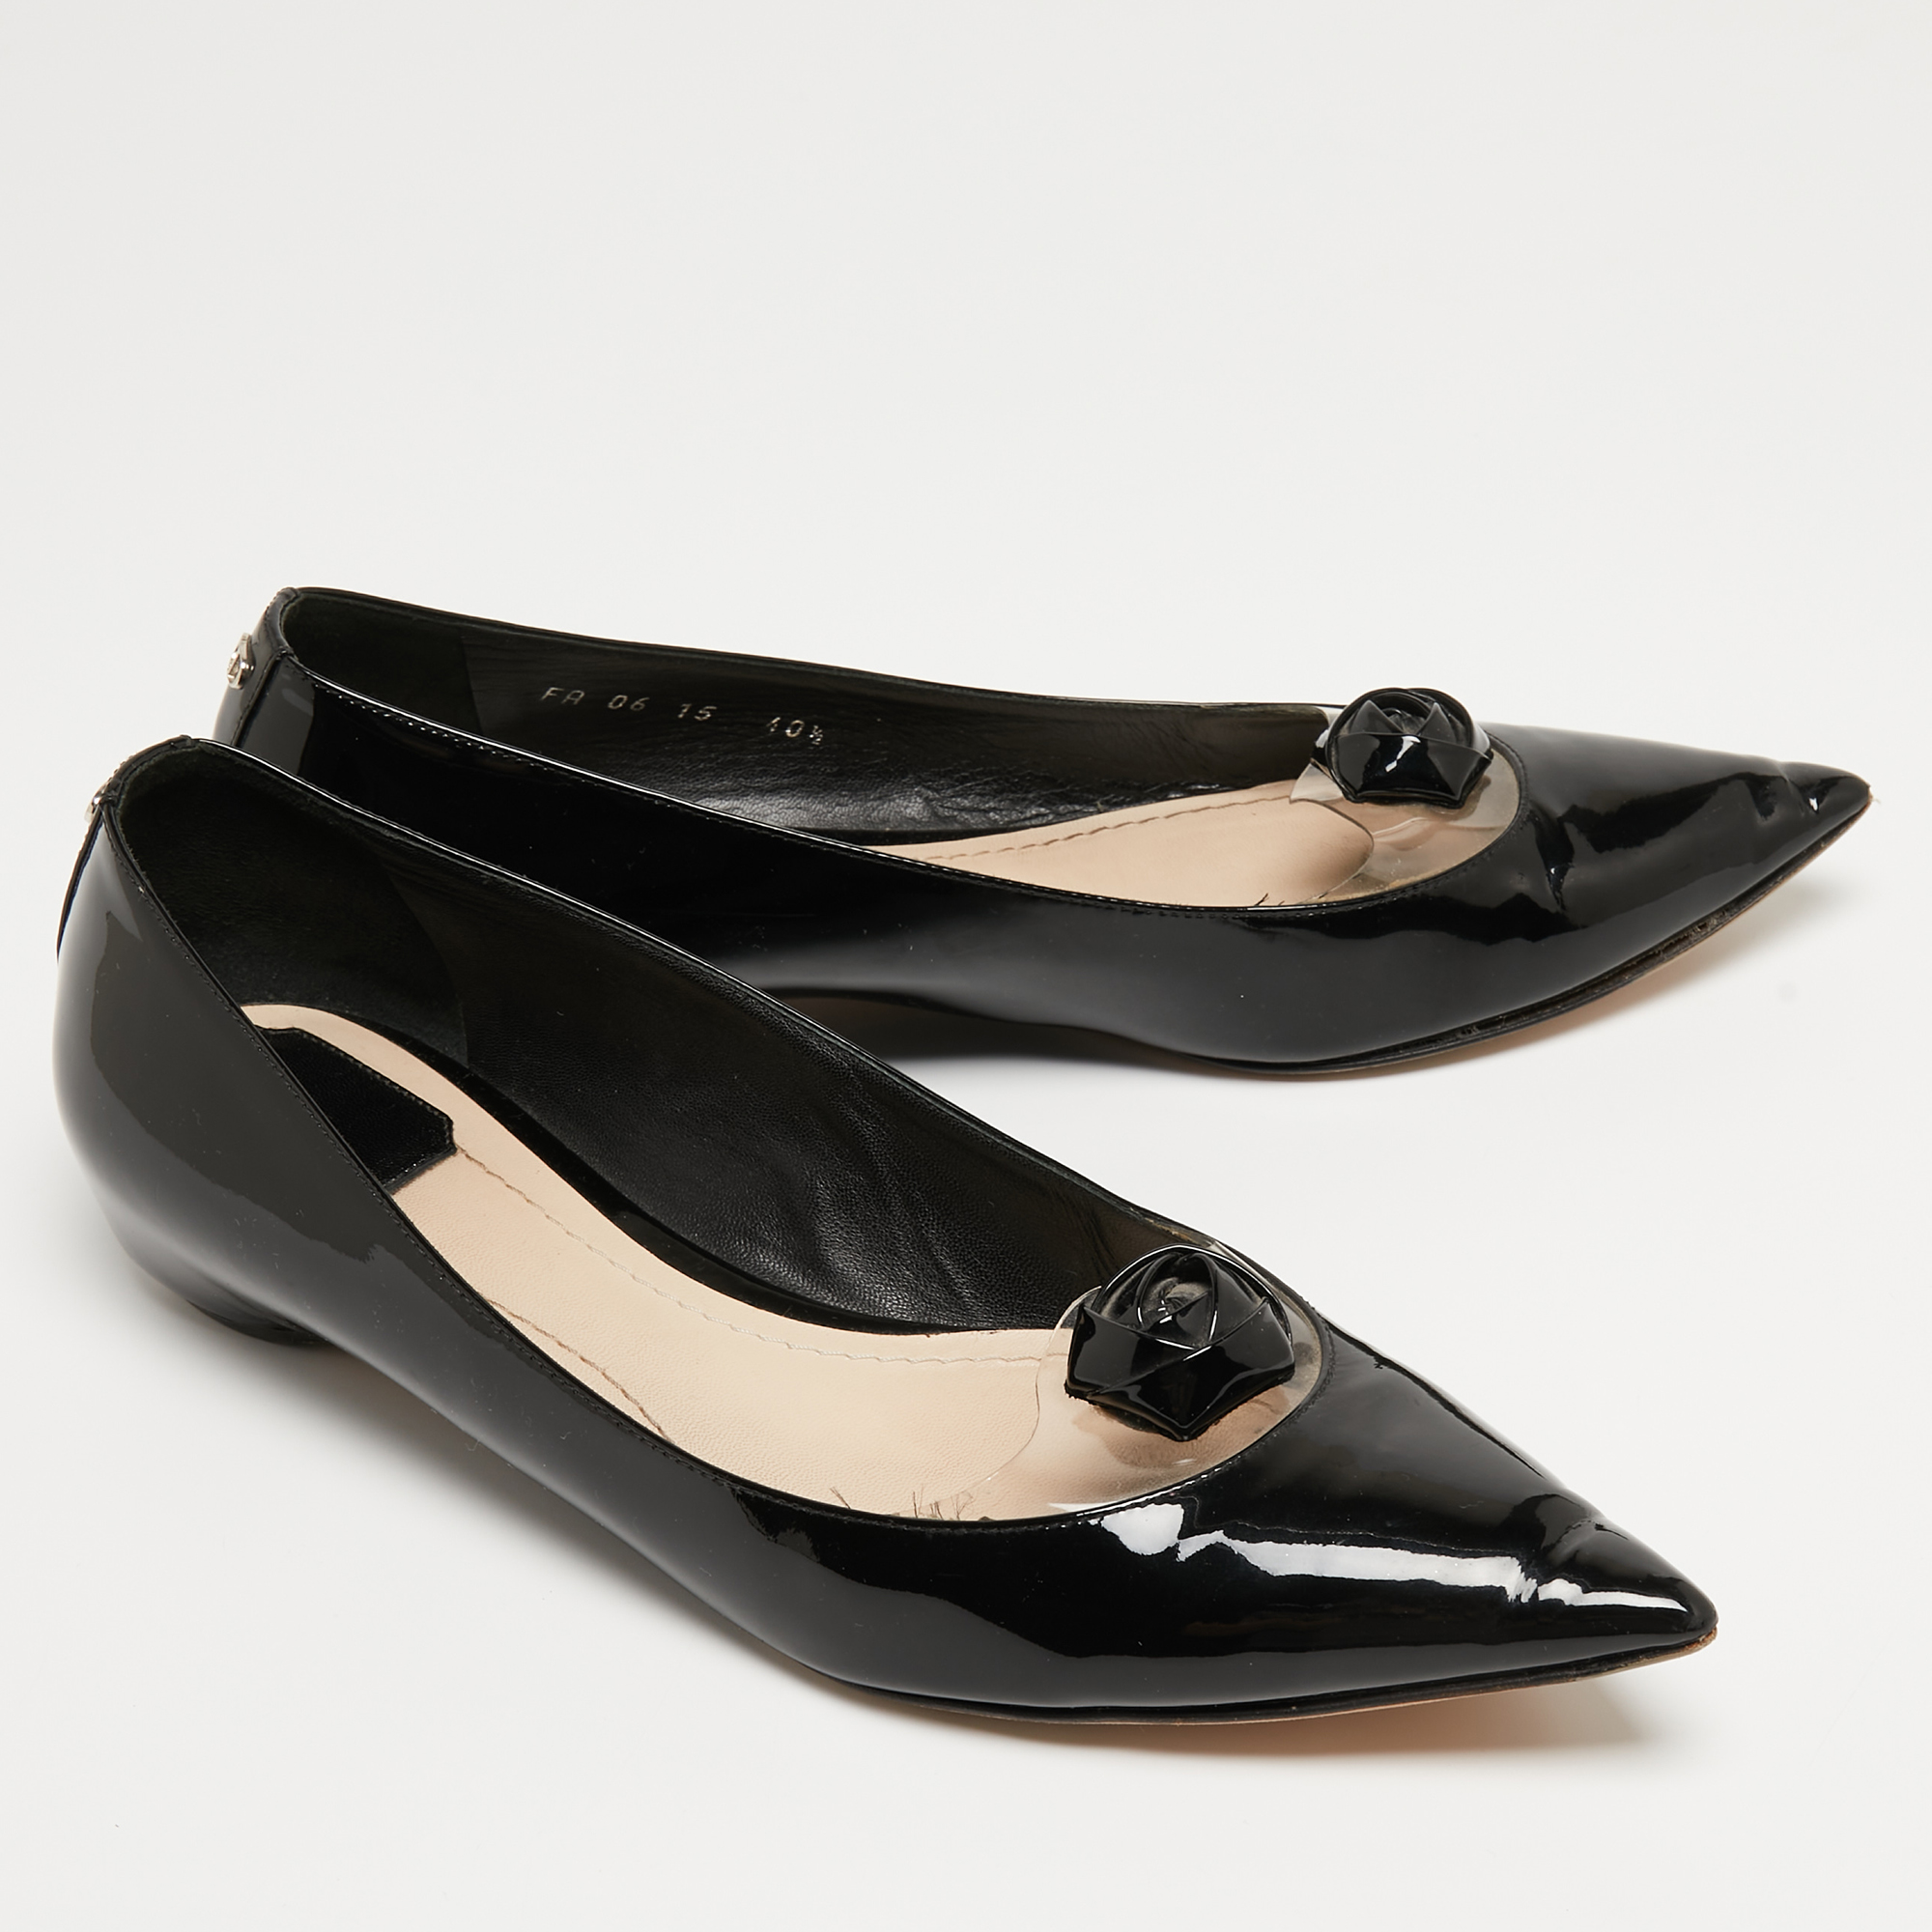 Dior Black Patent Leather And PVC Pointed Toe Ballet Flats Size 40.5